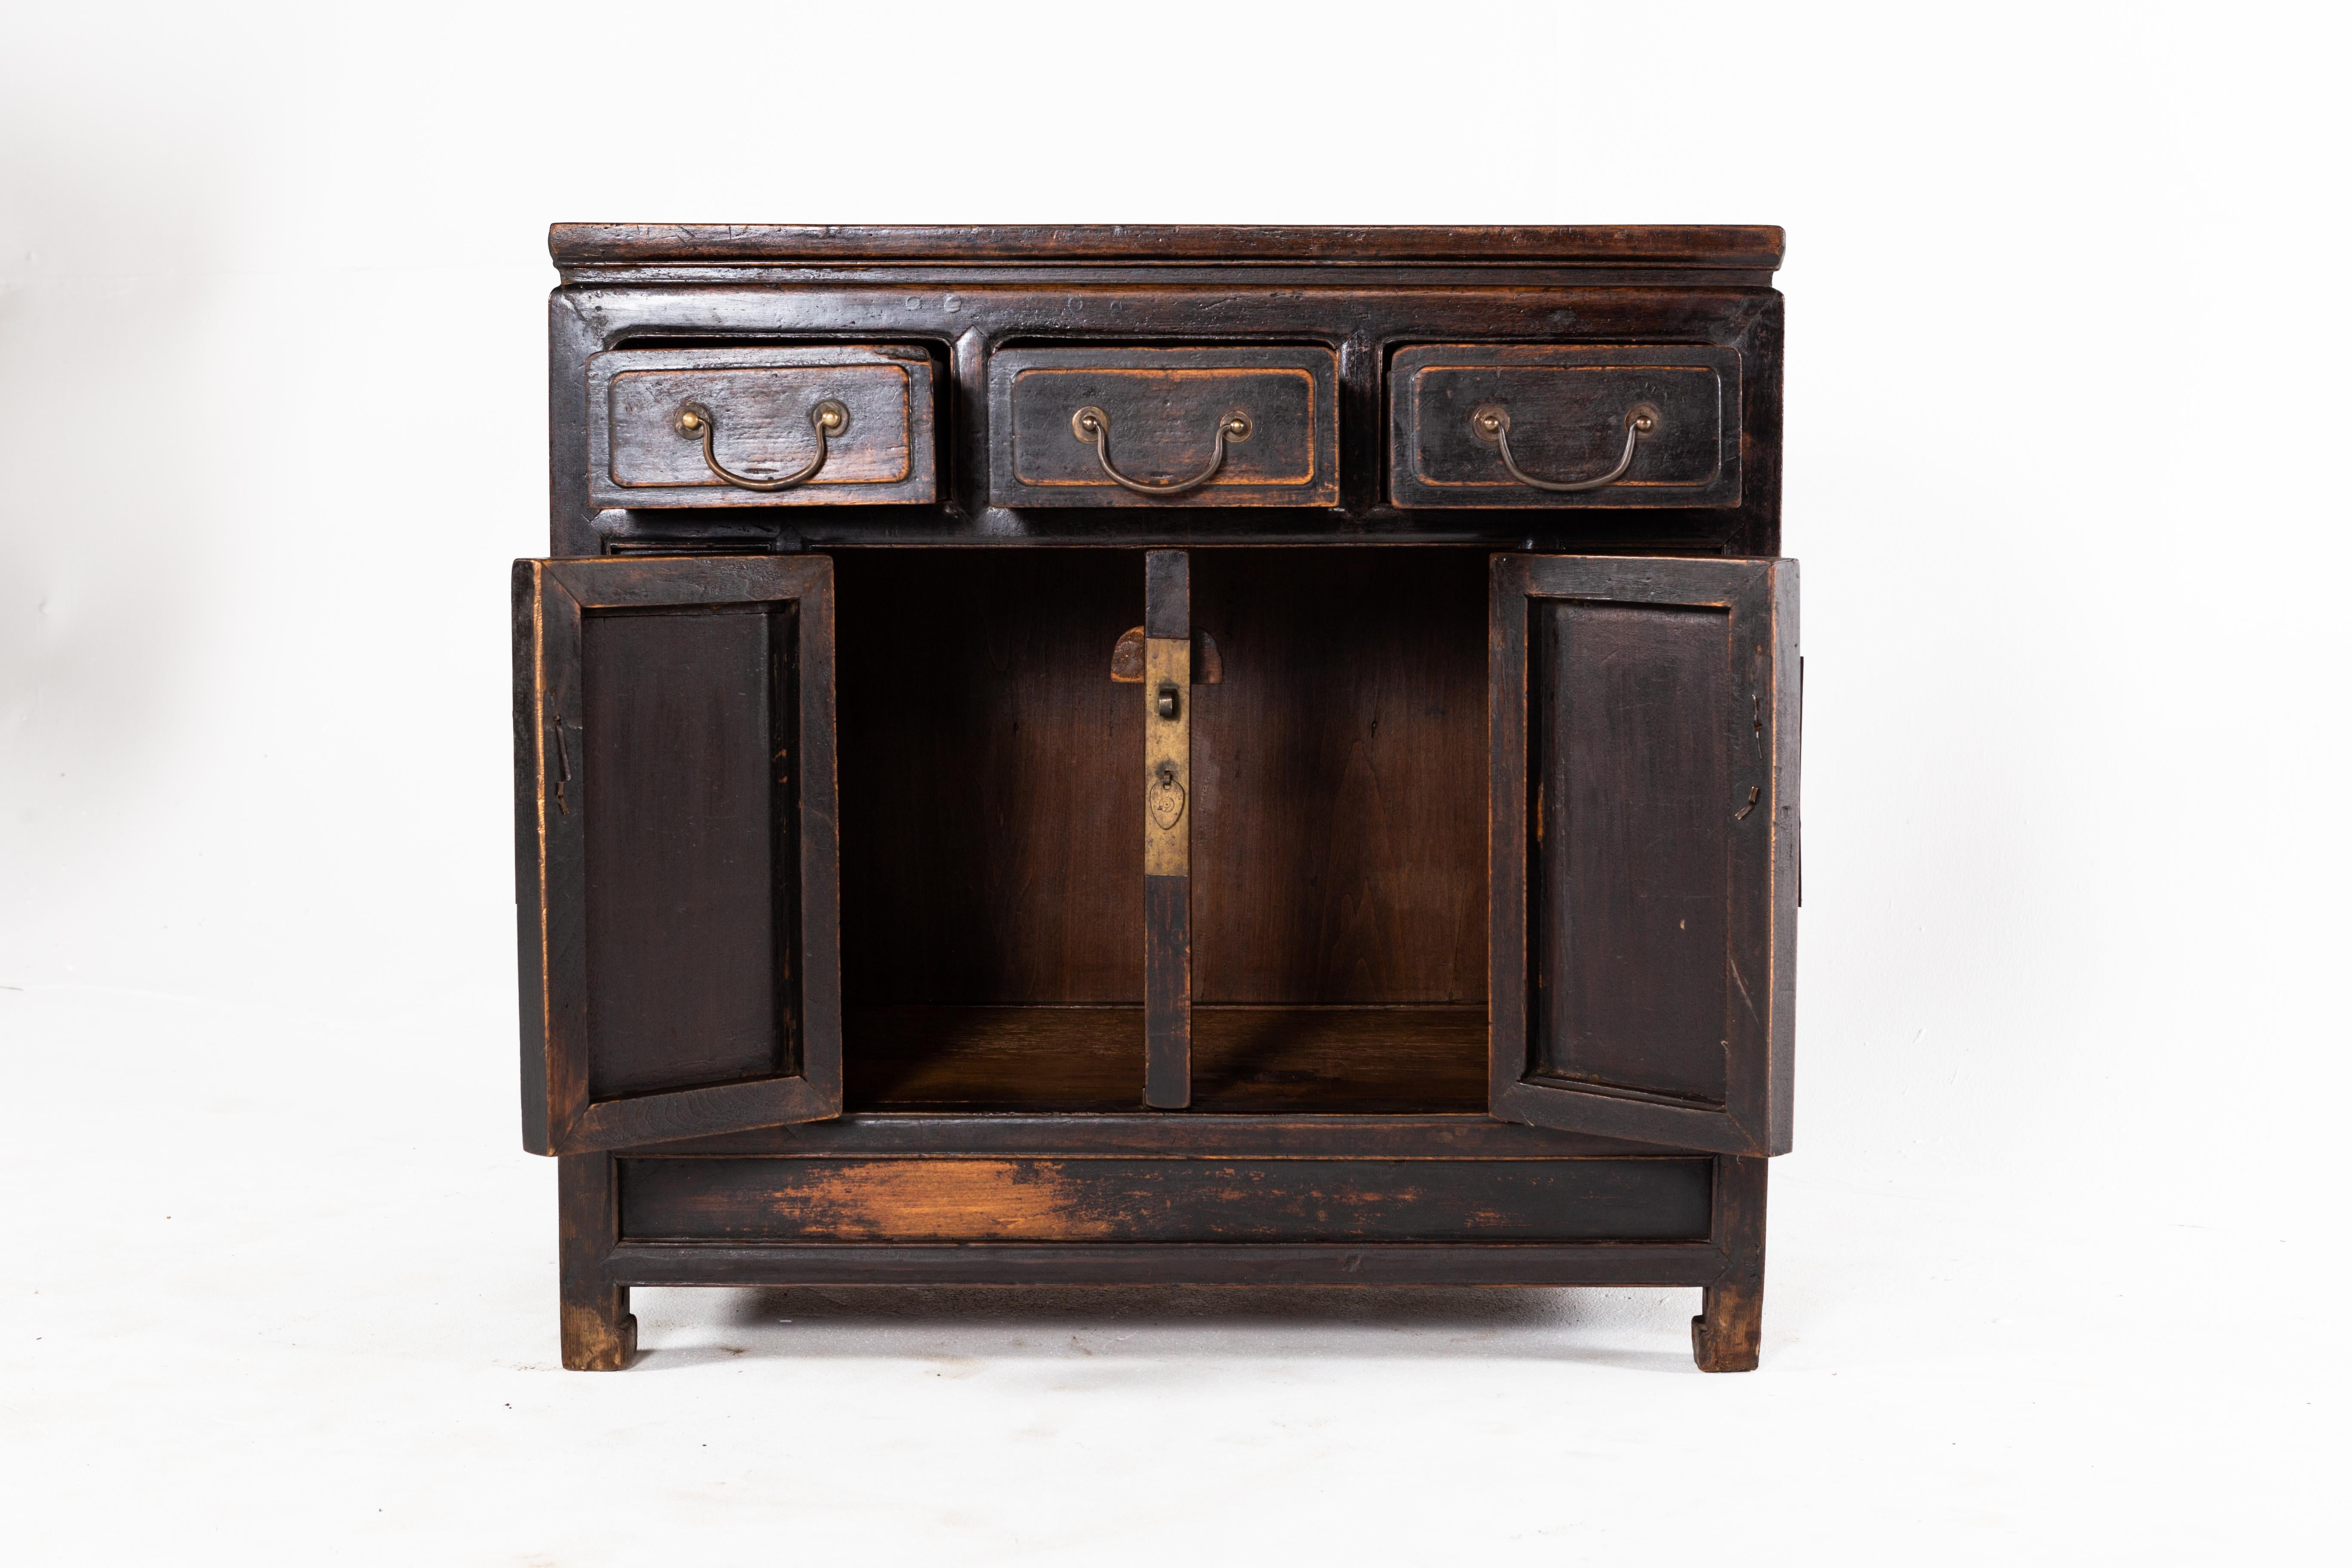 This cabinet is from Beijing, China and was made from walnut, circa 19th Century. The piece features 3 drawers, a pair of doors, its original lacquer, and a shelf for storage. Wear consistent with age and use.